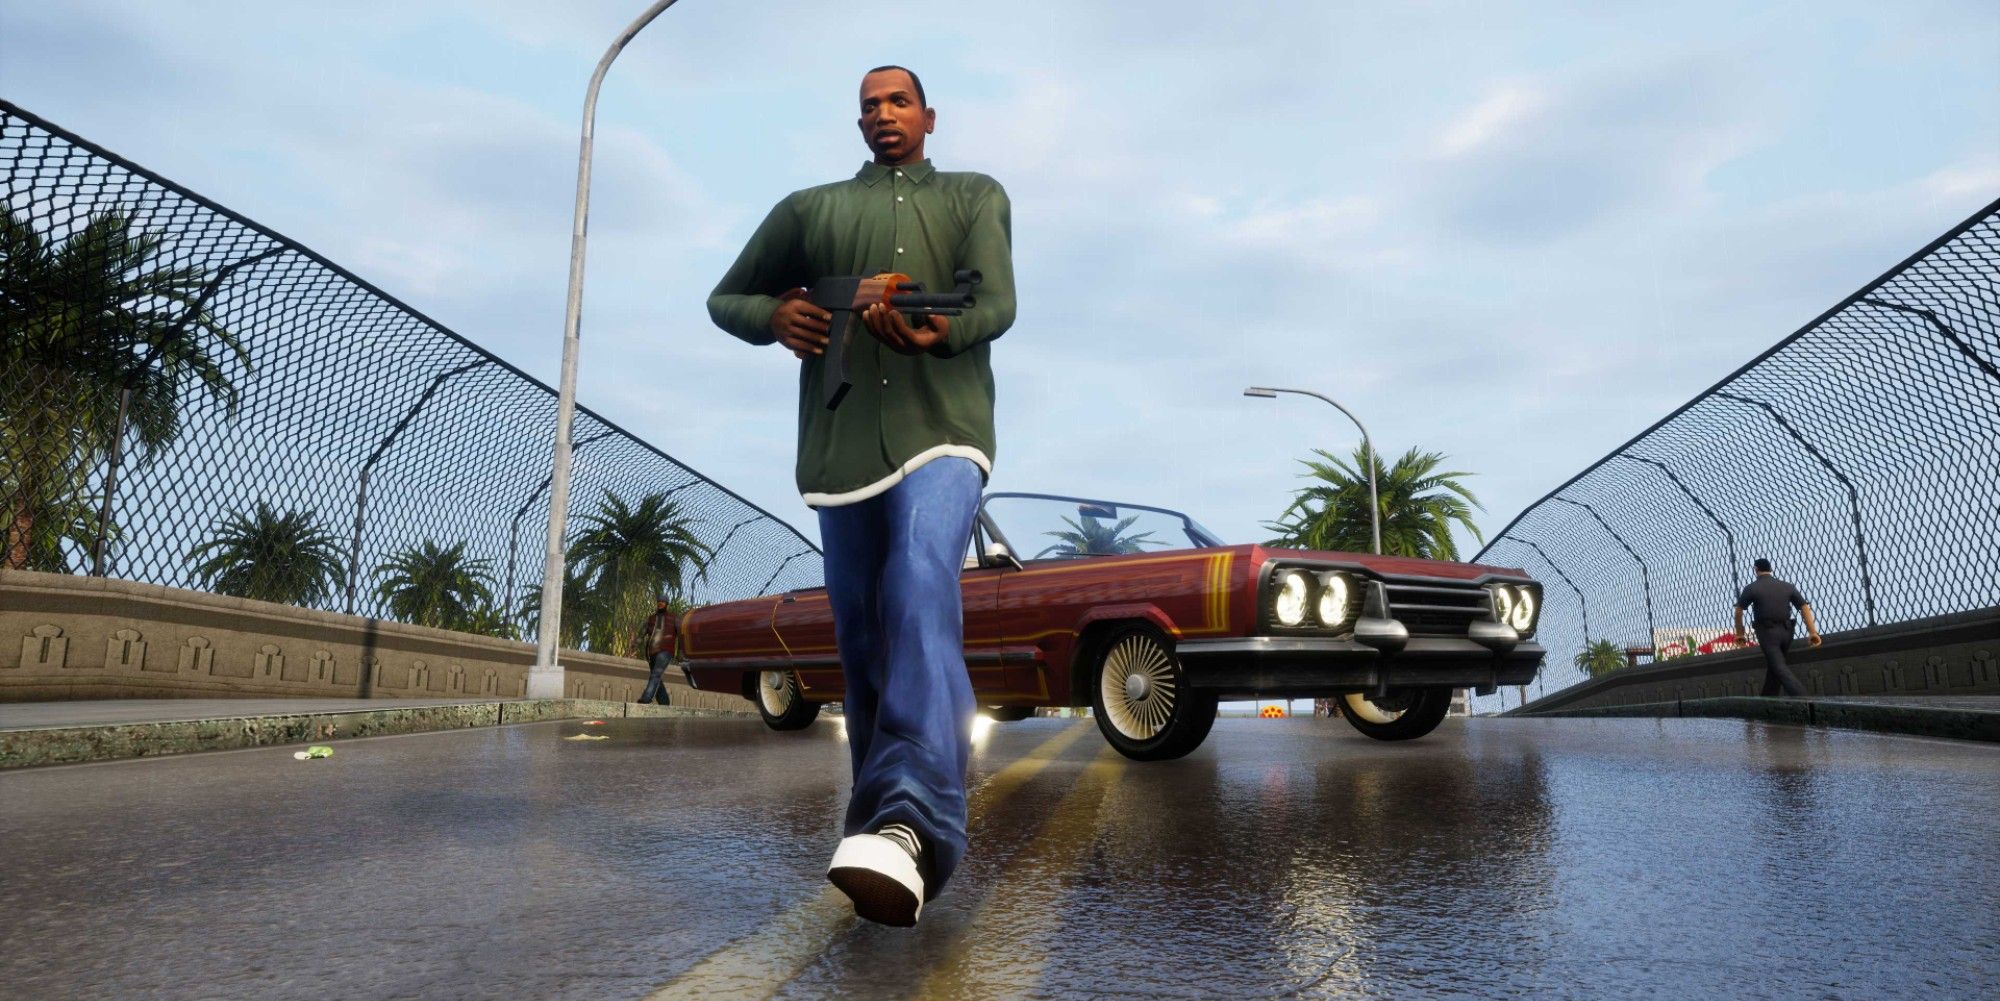 cj walking away from a car holding a gun in remastered gta san andreas